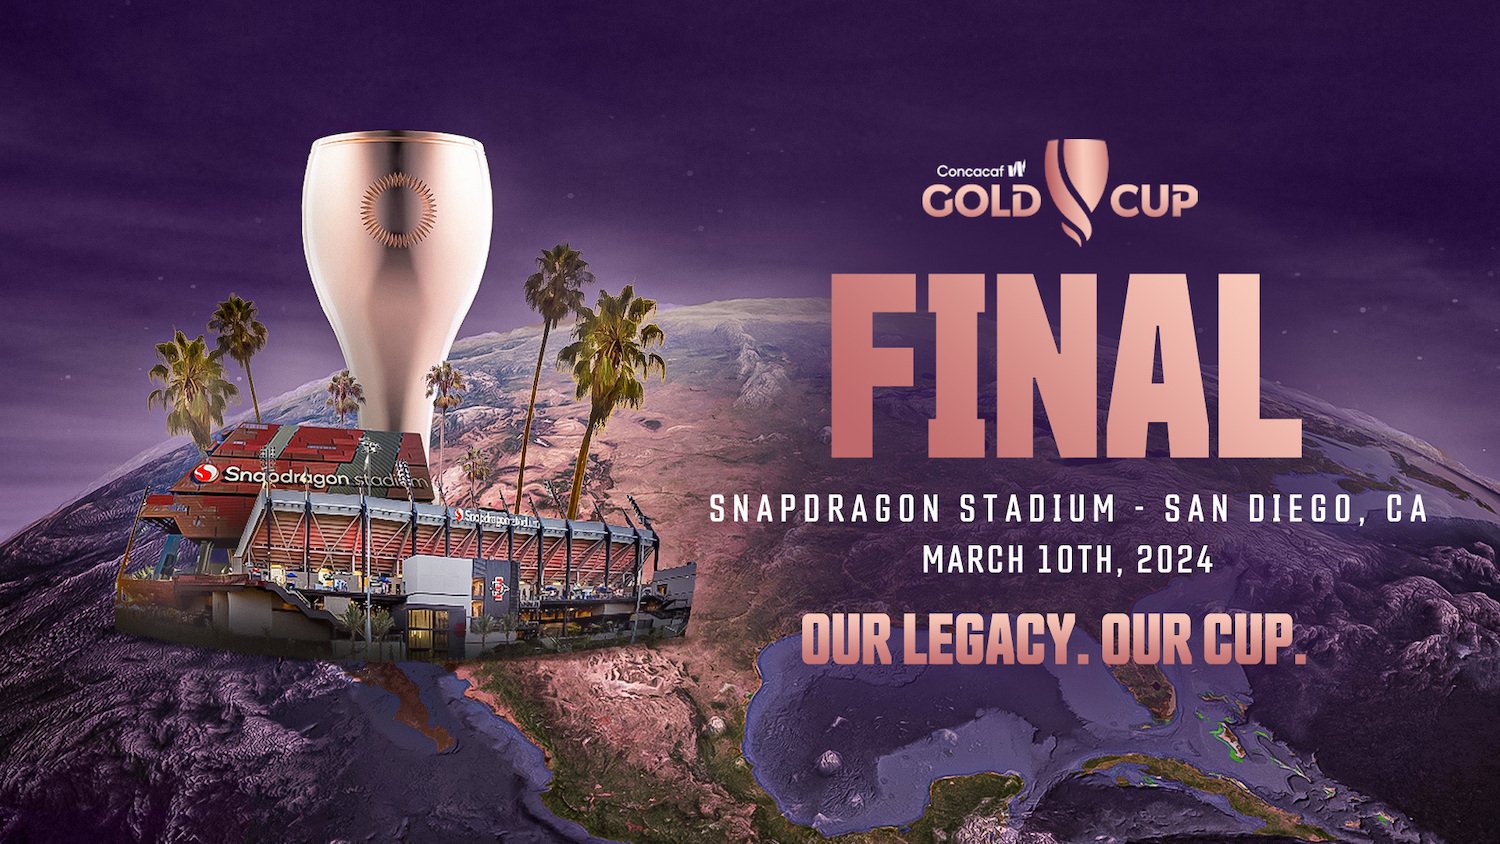 CONCACAF promotion for the 2024 Women's Gold Cup Final Match Hosted at Snapdragon Stadium San Diego